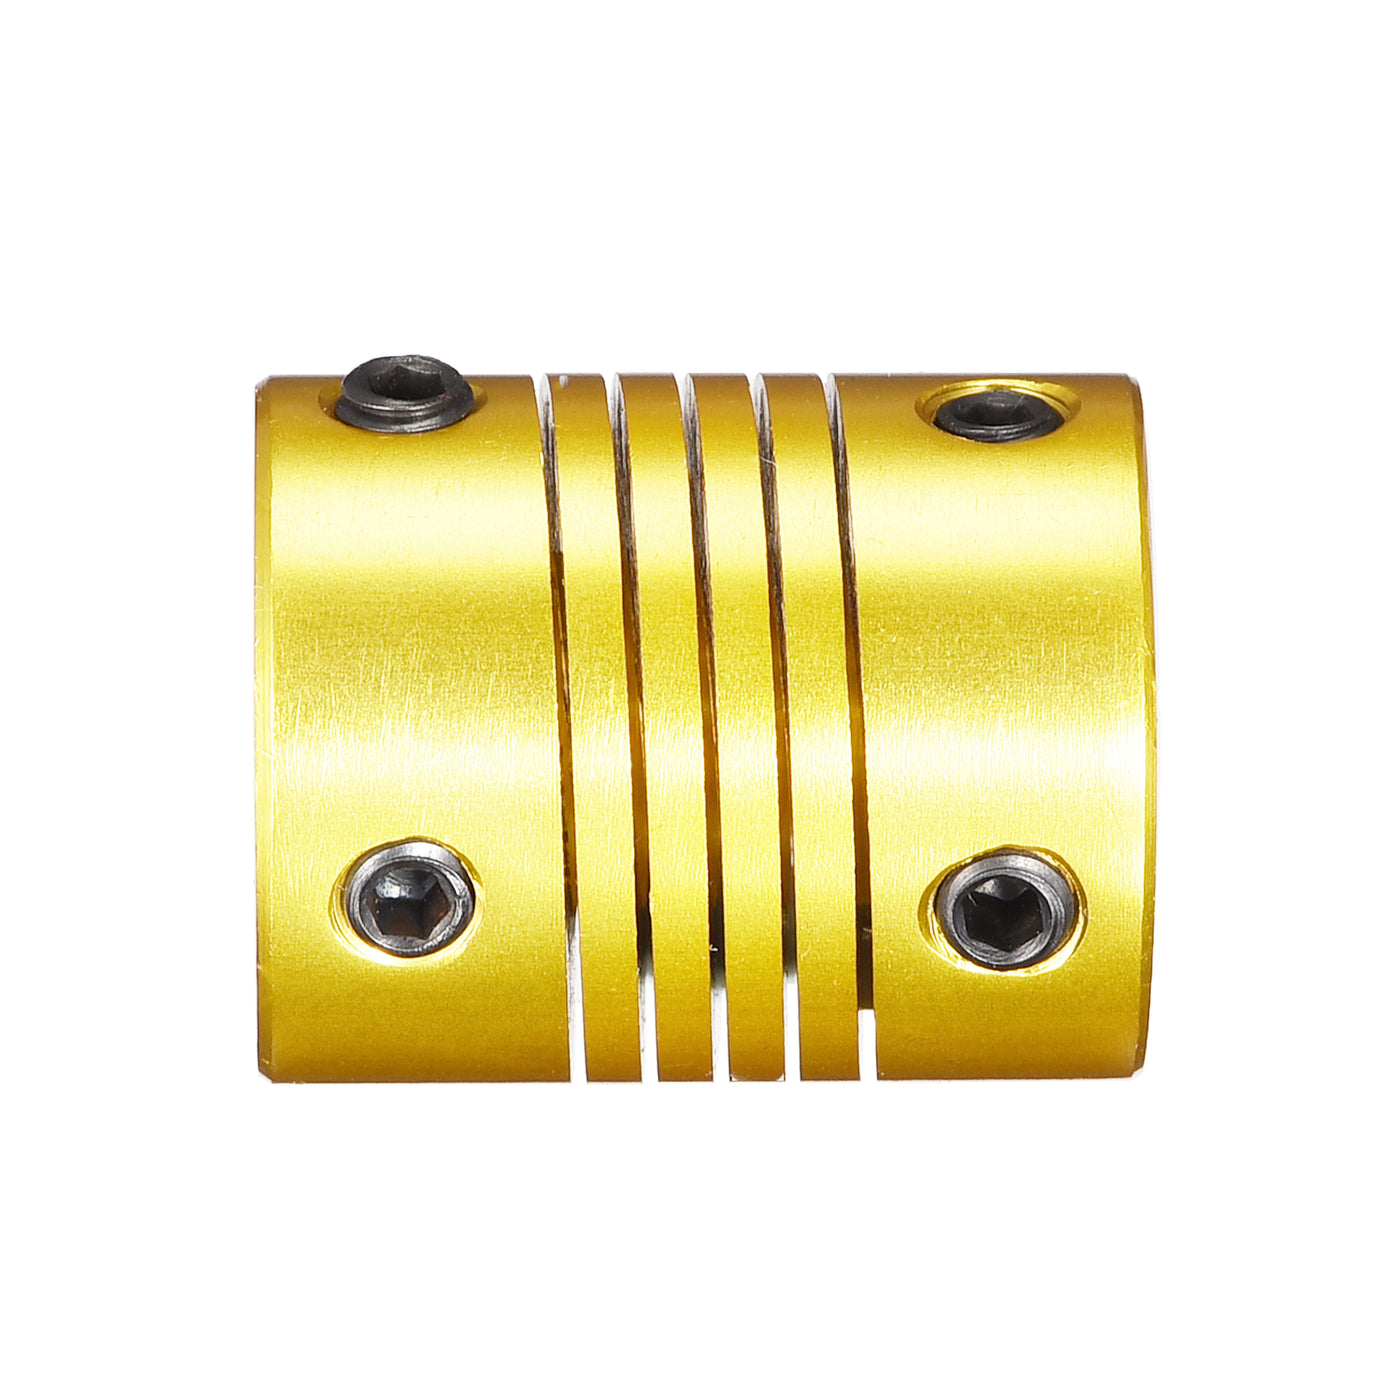 uxcell Uxcell 2 Pcs 10mm to 6.35mm Aluminum Alloy Shaft Coupling Flexible L25xD20 Golden Tone